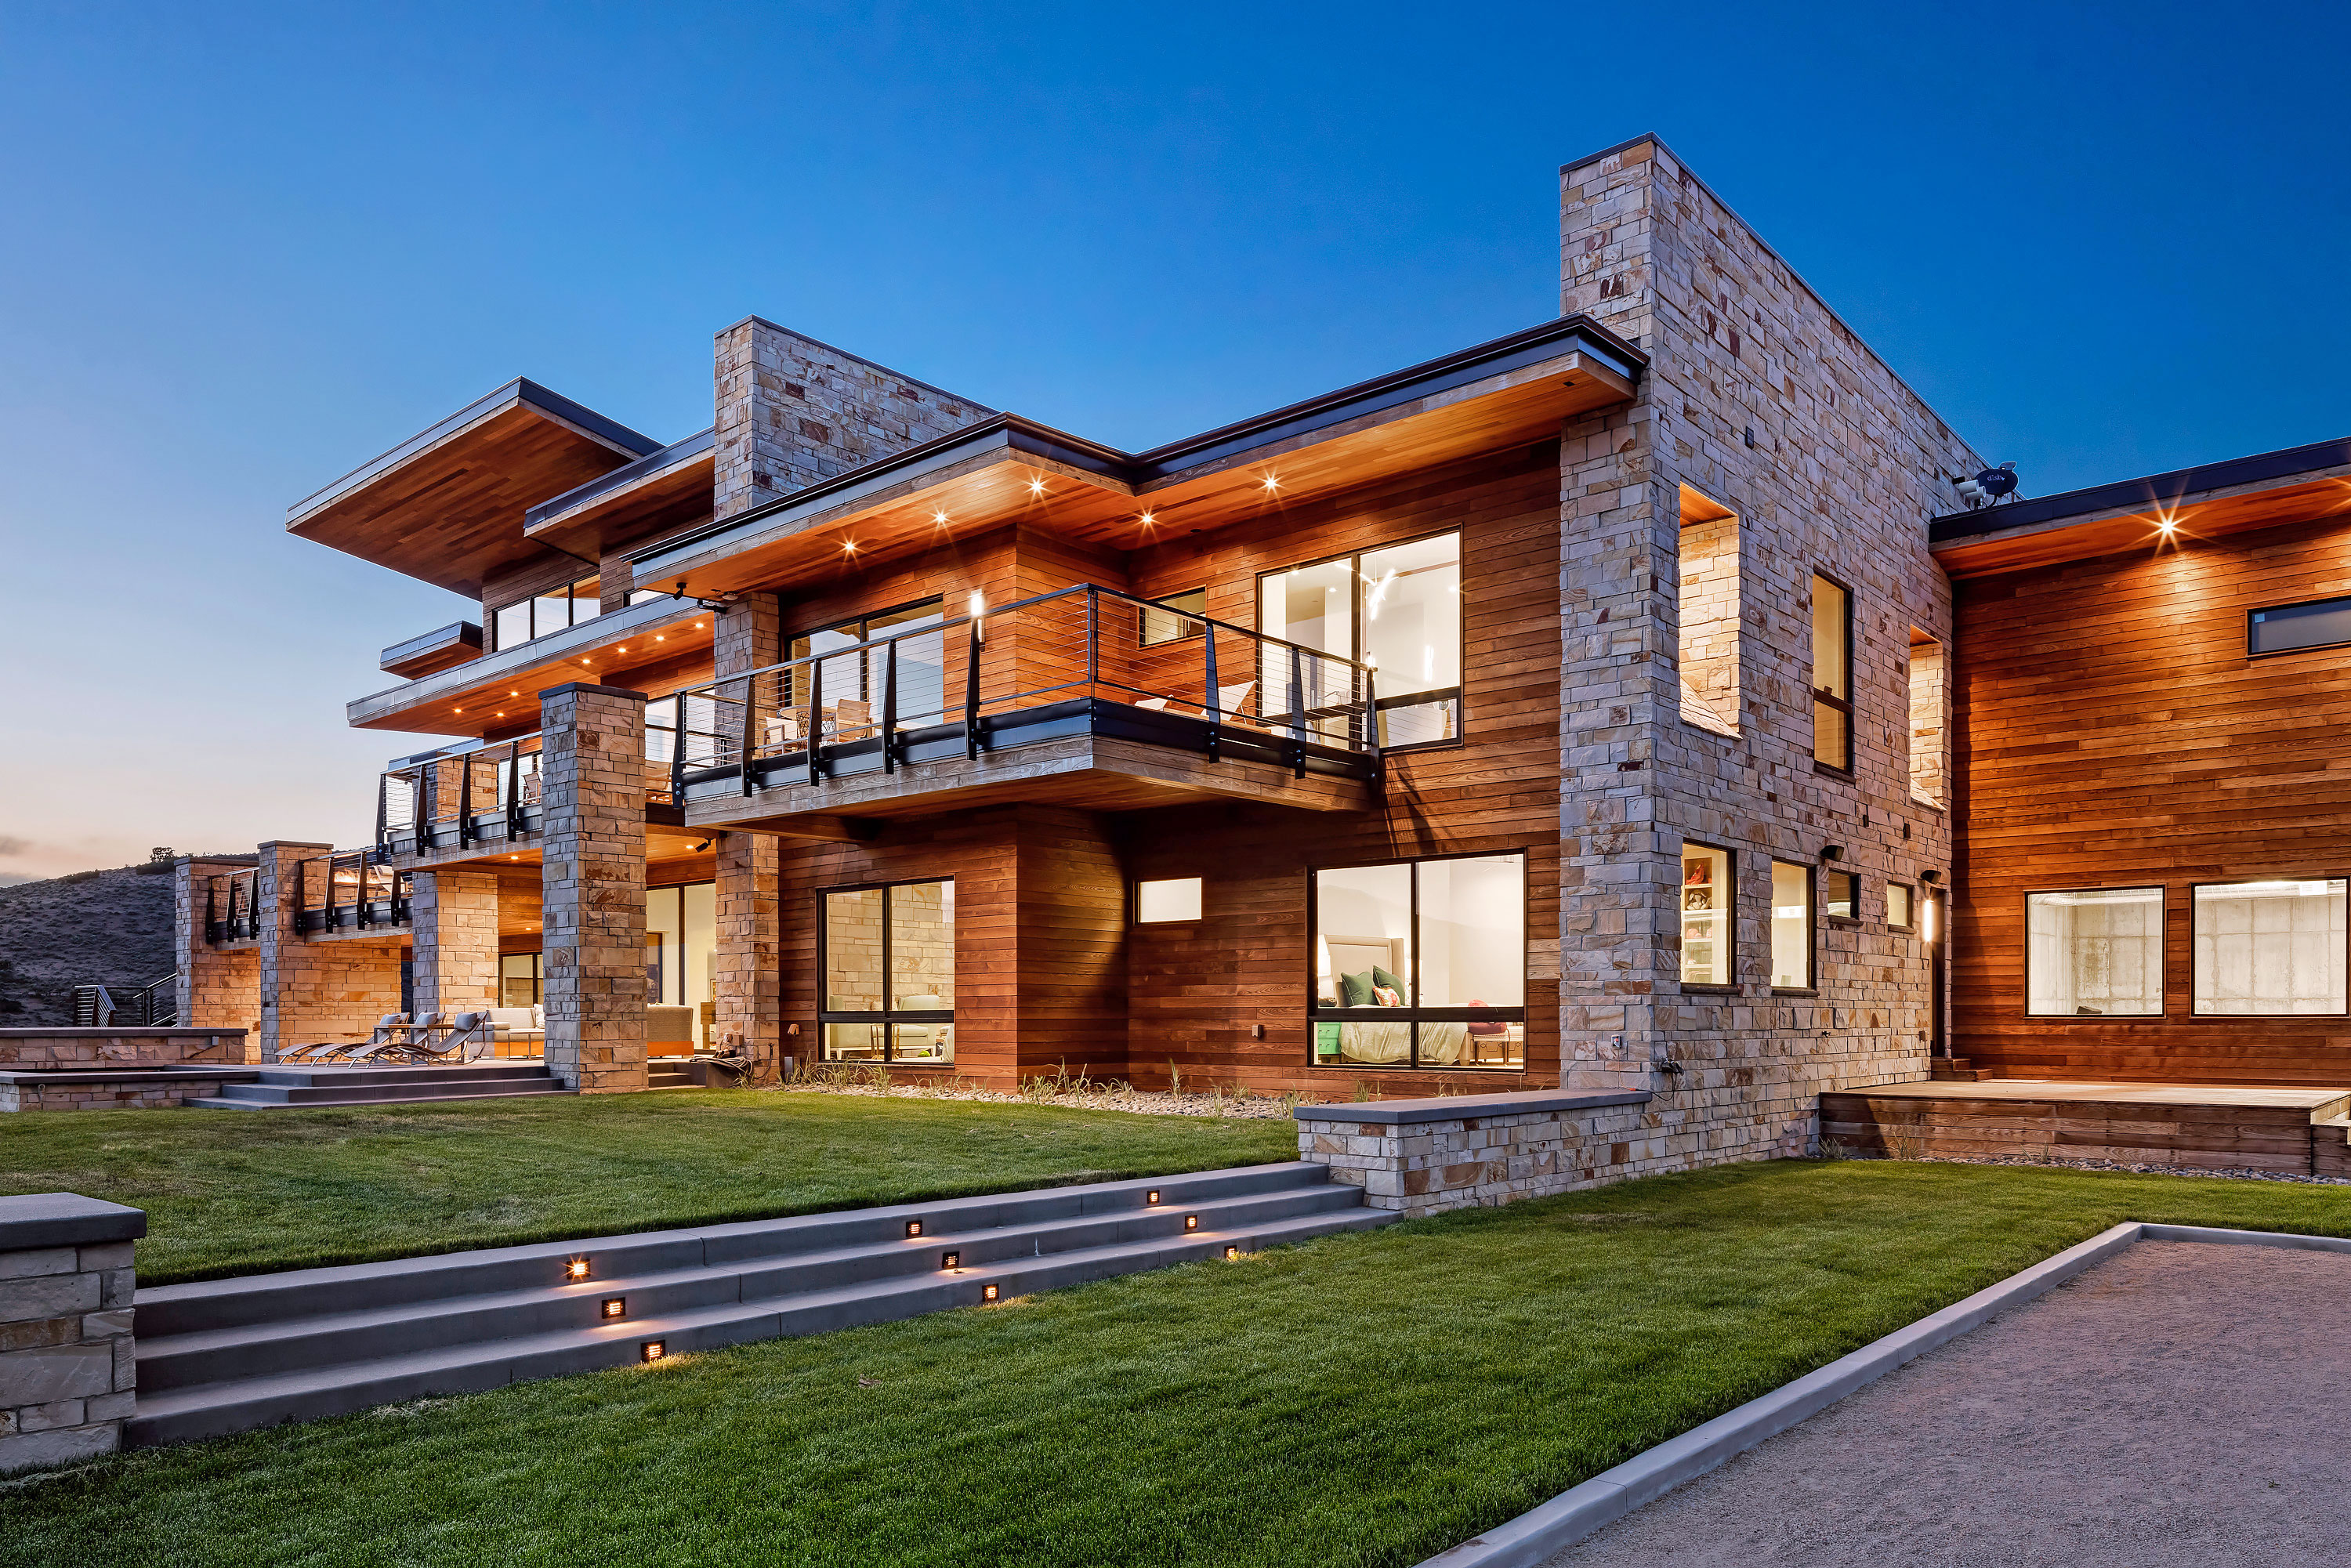 Mountain Estate Home - Heber City, Utah. Architectural Photography by Alan Blakely.